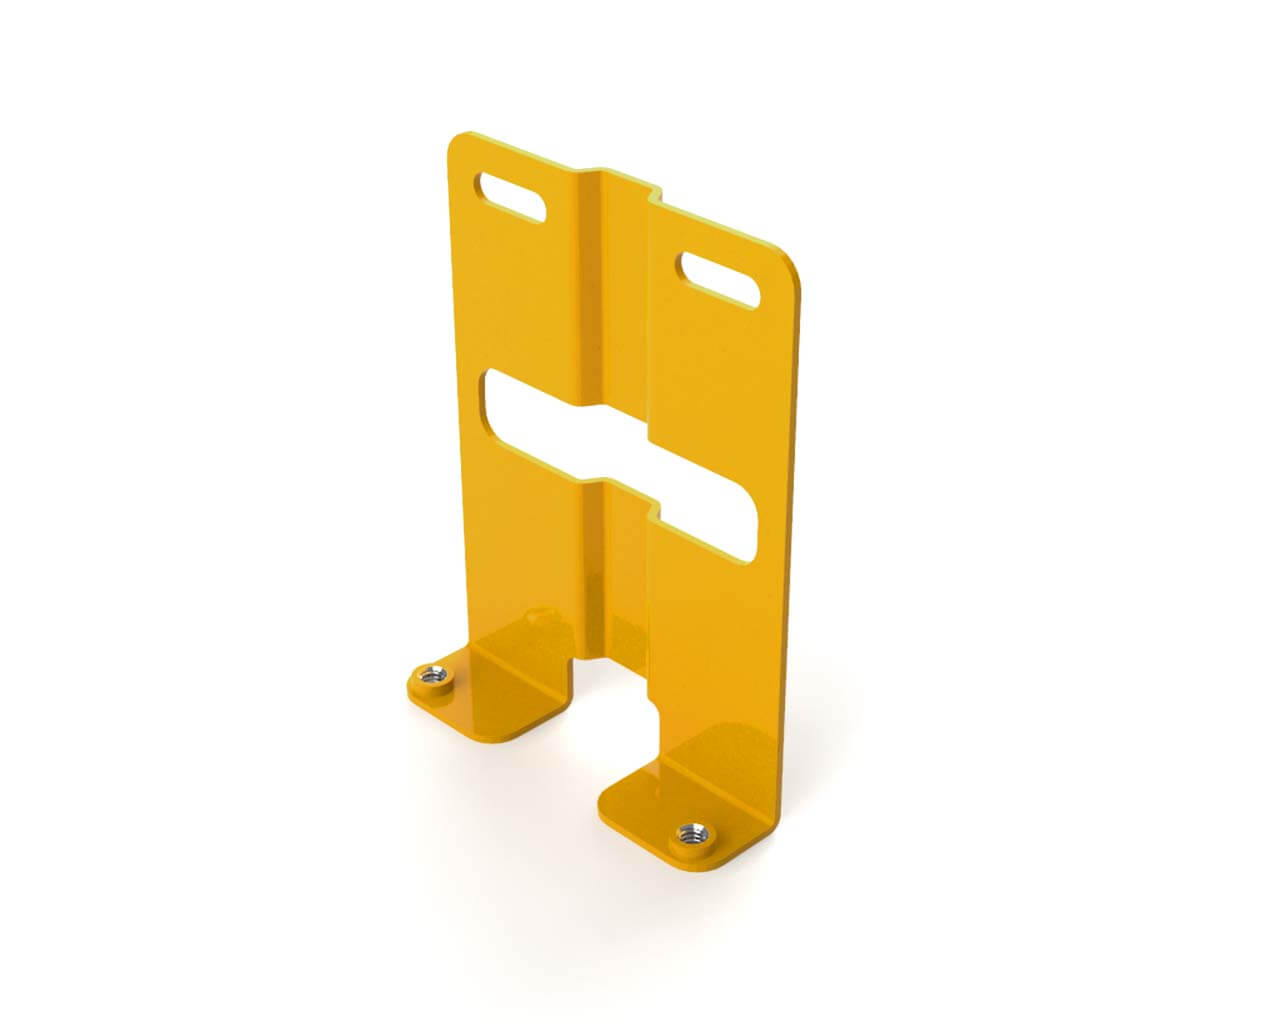 PrimoChill SX Upright CTR2 Mount Bracket - PrimoChill - KEEPING IT COOL Yellow